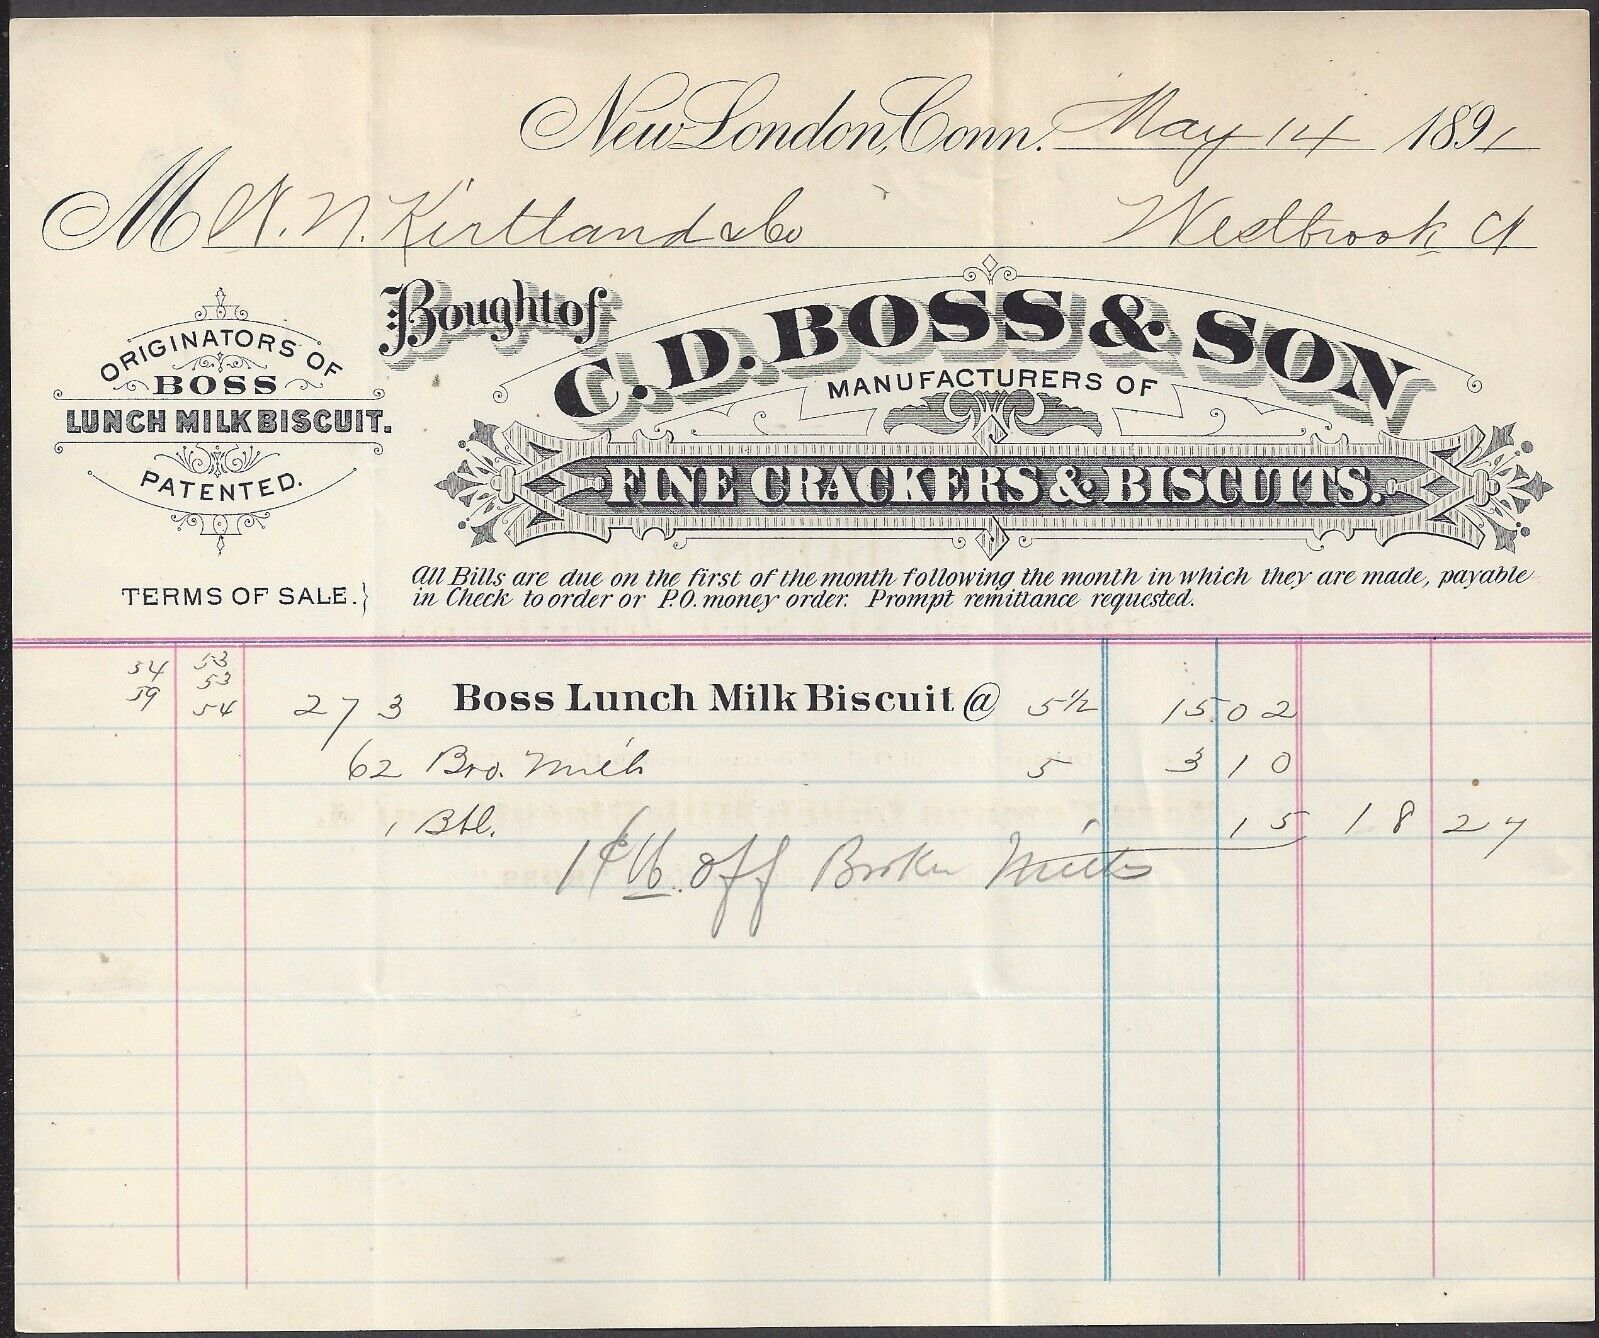 NEW LONDON, CT ~ C. D. BOSS & SON, CRACKERS & BISCUITS ~ BILLHEAD MAY 1891